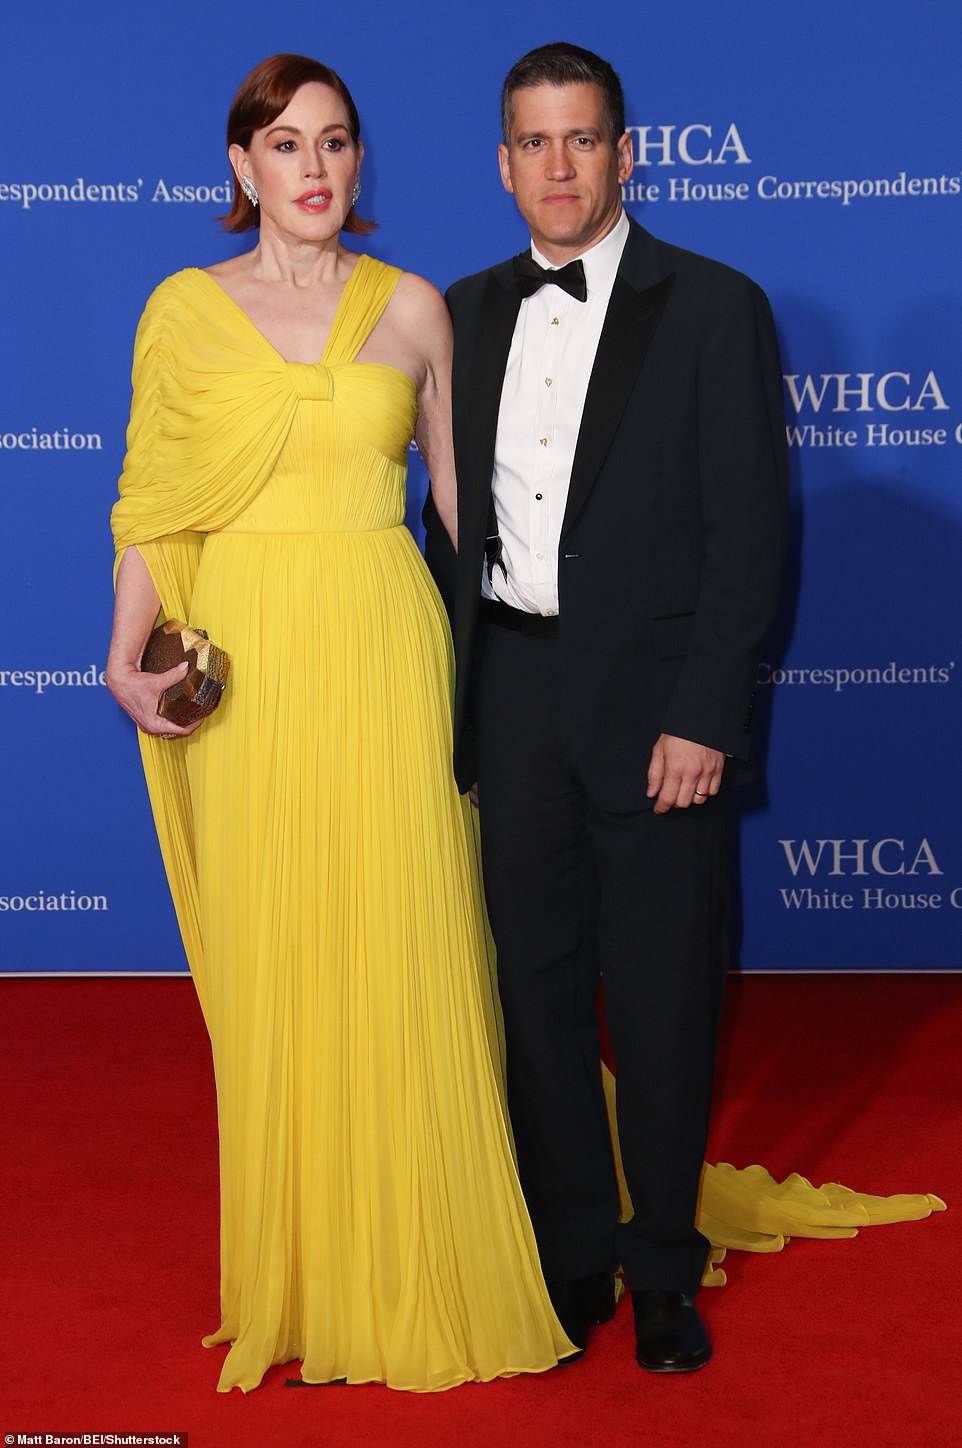 Ringwald struck various poses on the red carpet as she arrived at the event and was also accompanied by her husband and author, Panio Gianopoulos, whom she married in 2007.